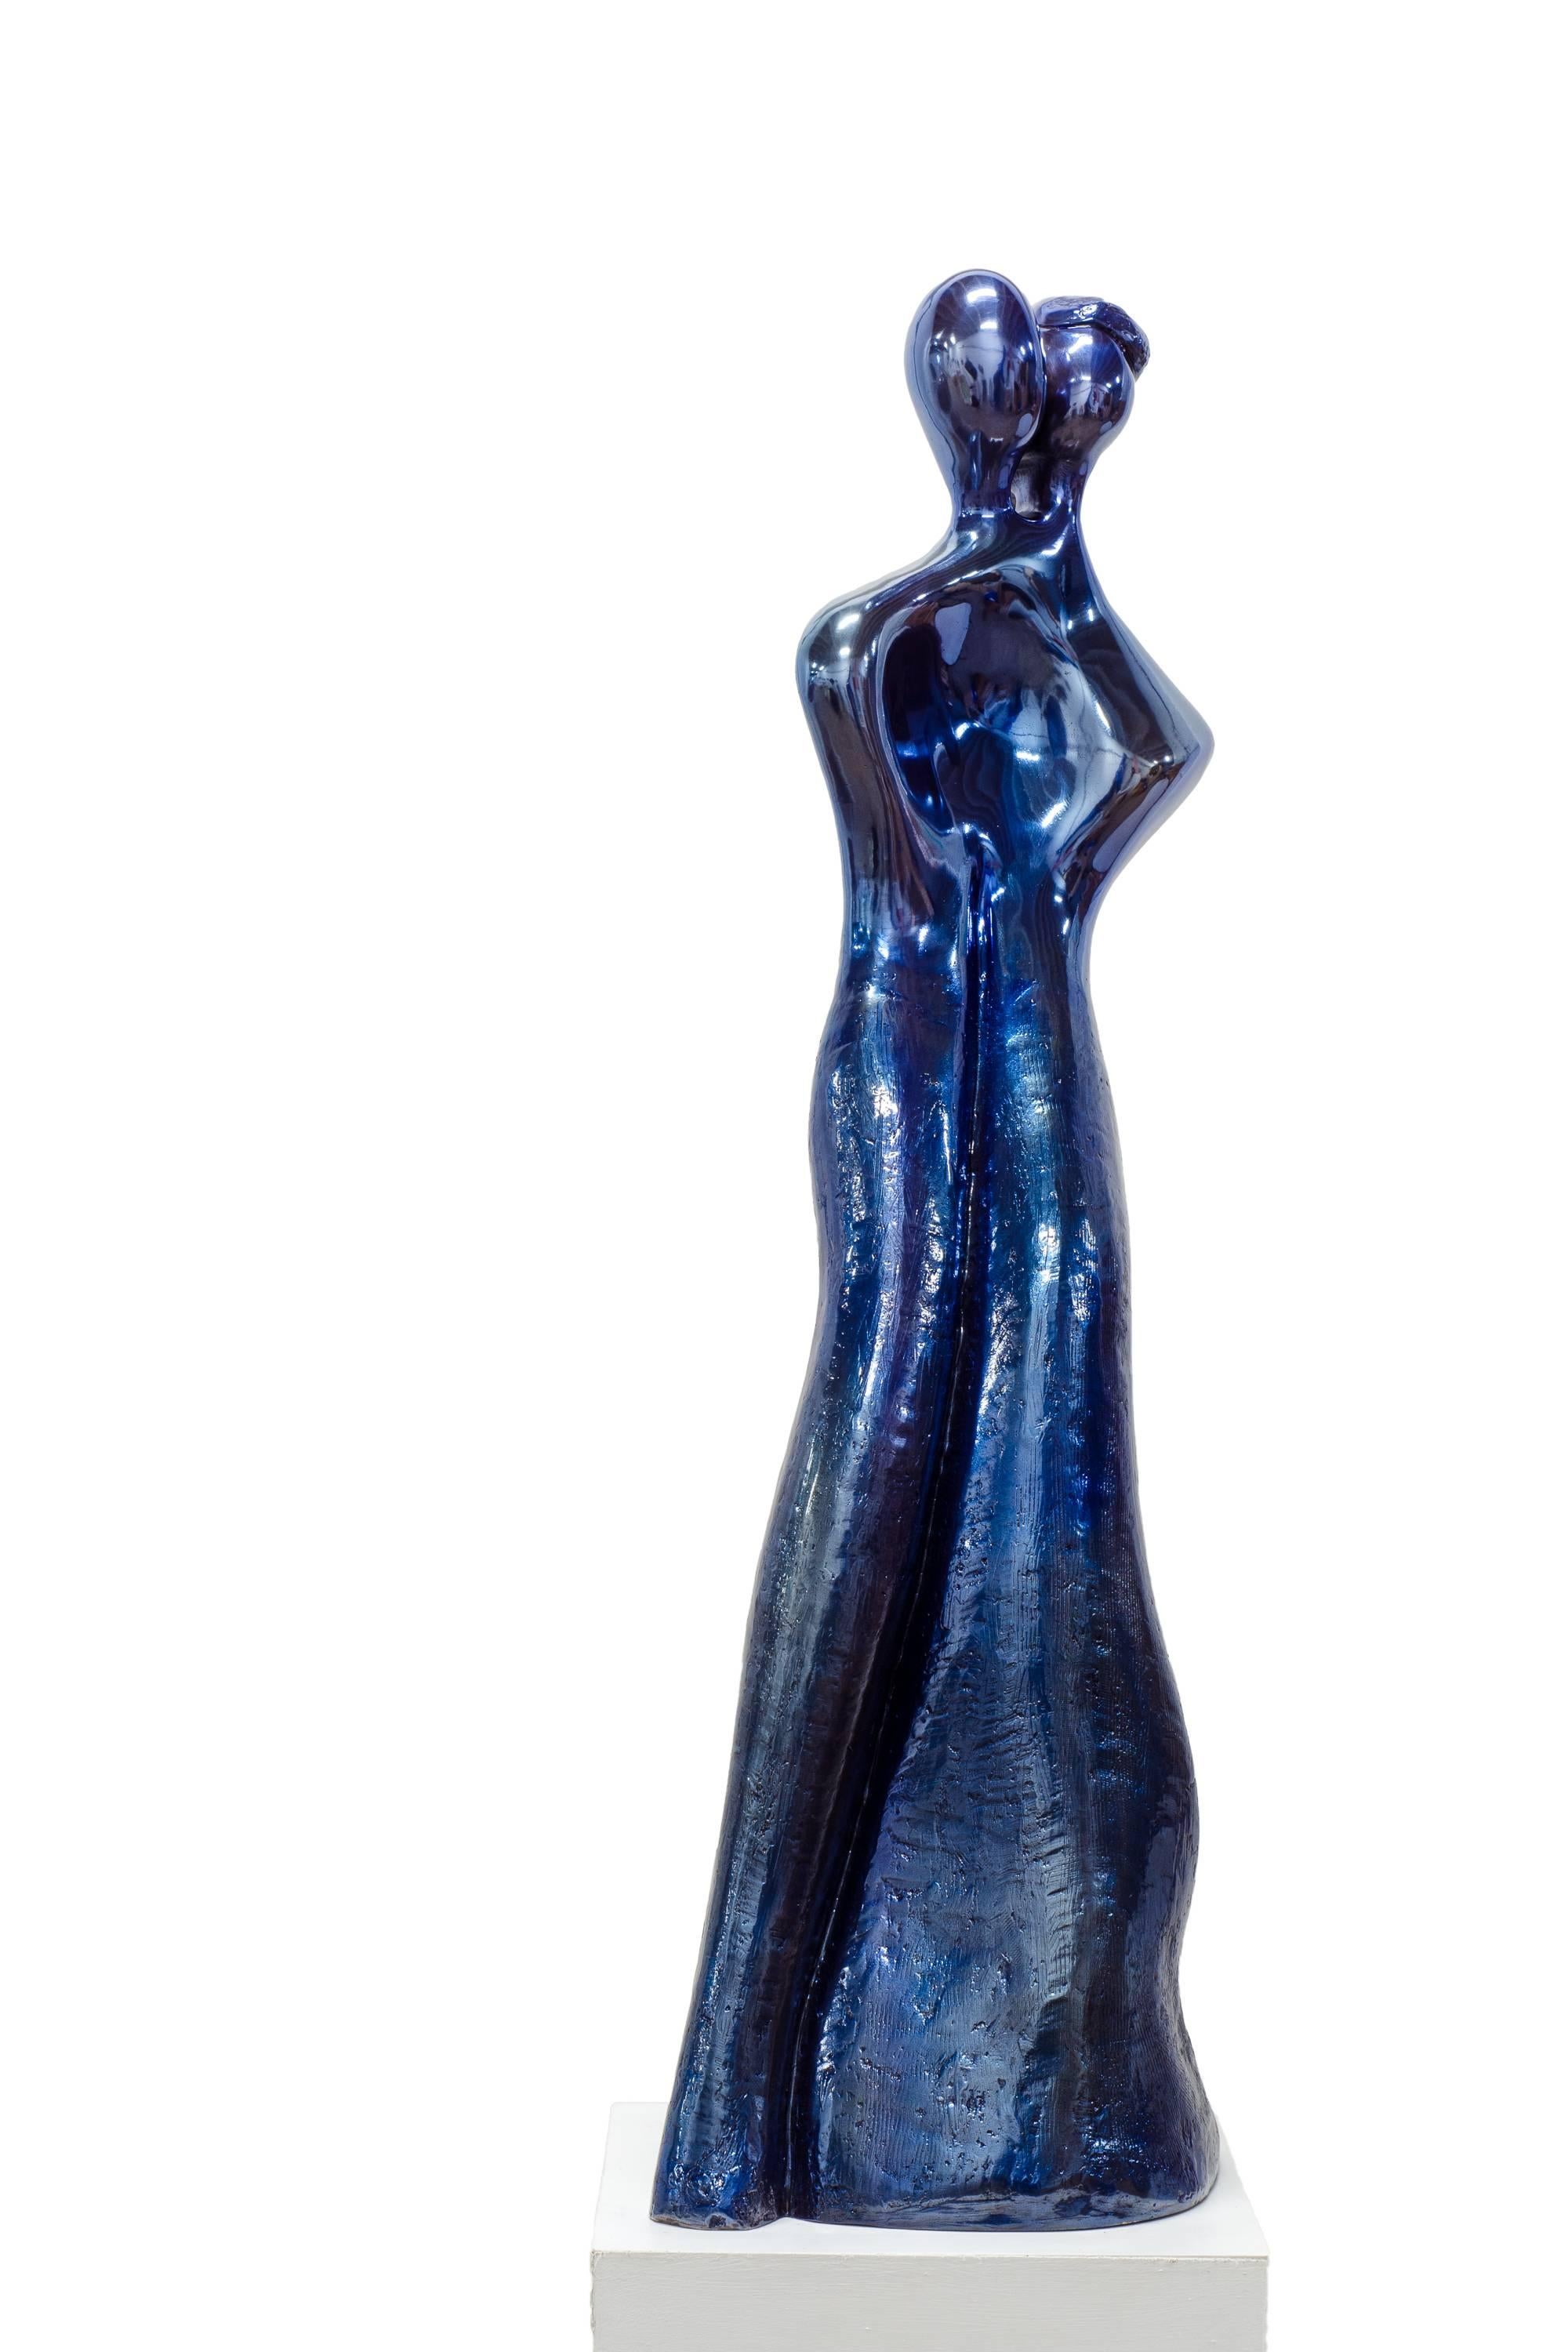 Soulmates #1 (in Blue). When In love, their souls and bodies fuse into just one - Sculpture by Beatriz Gerenstein